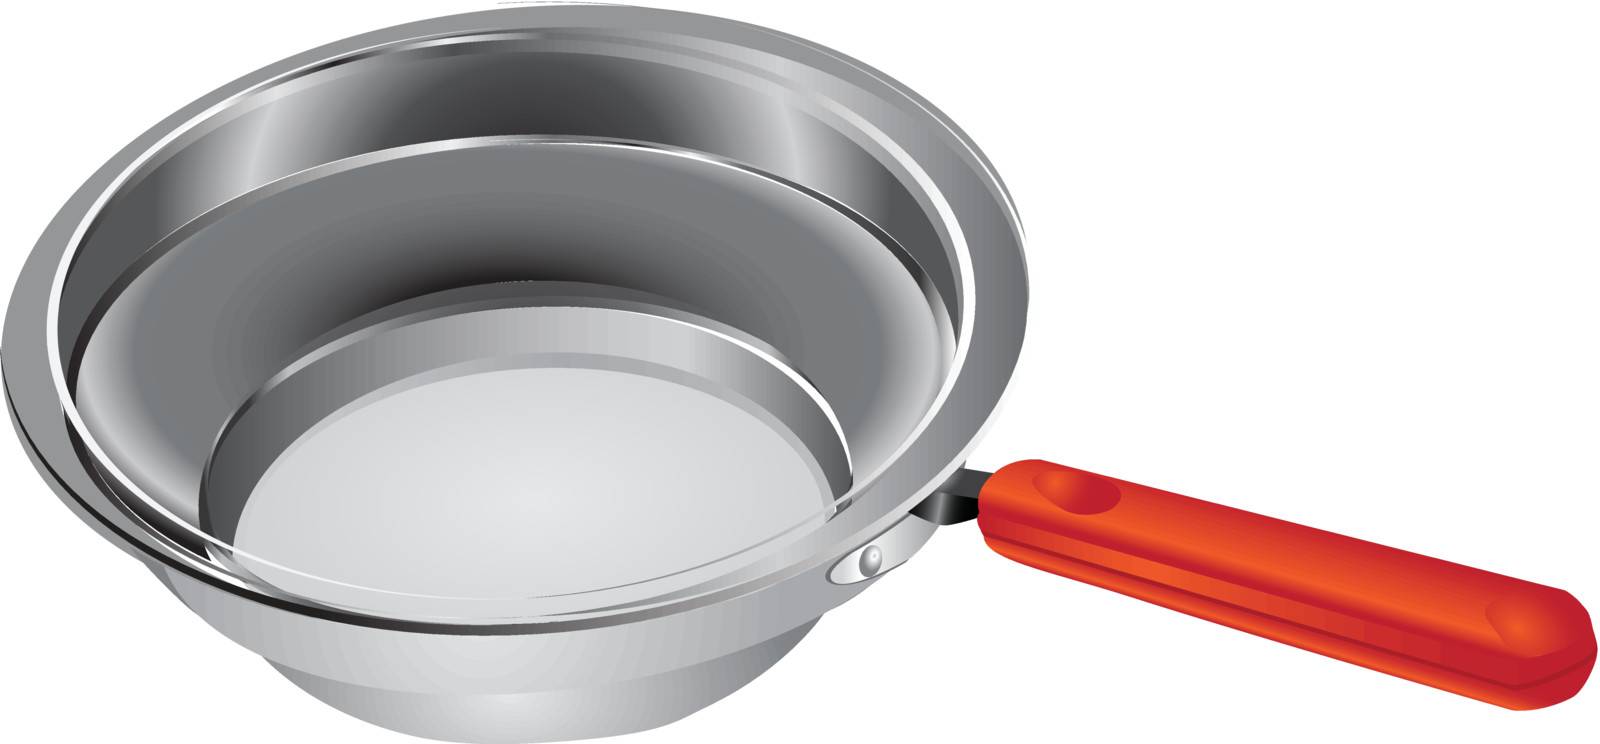 Stainless steel bowl with handle. Vector illustration.